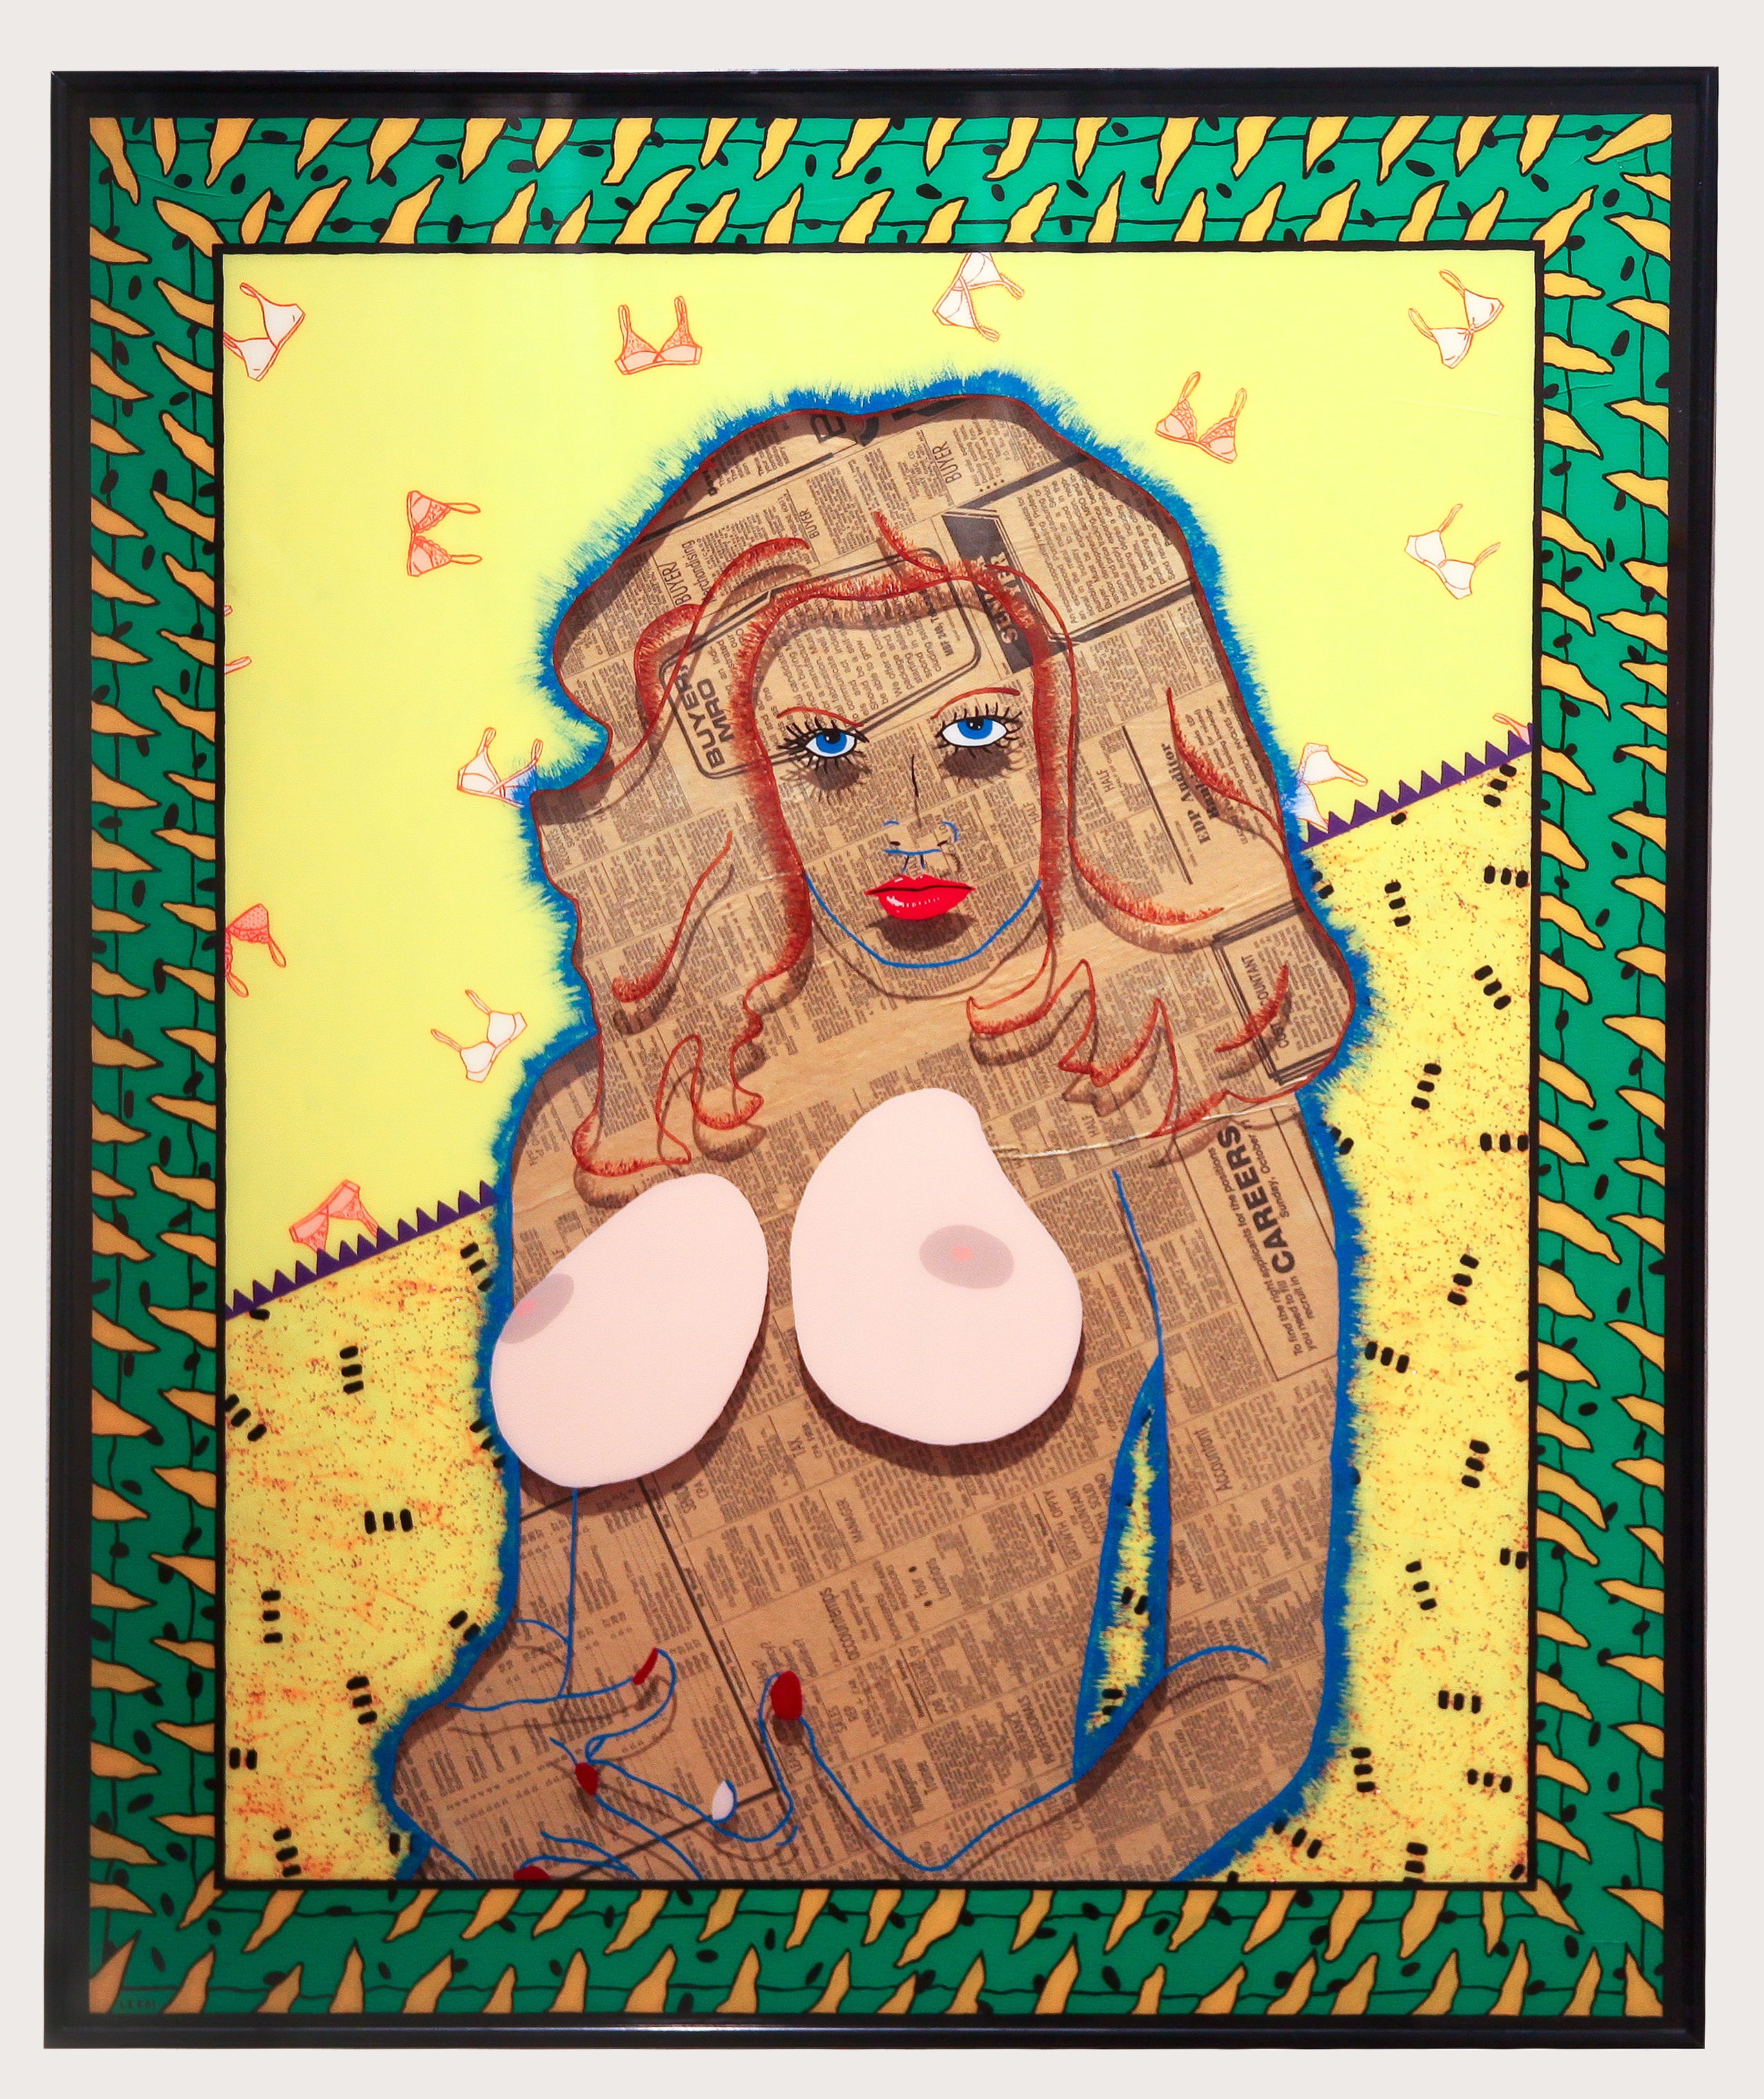 Be-Bops-a-Boobs-a-Lot, 1989, 31x26in. edited